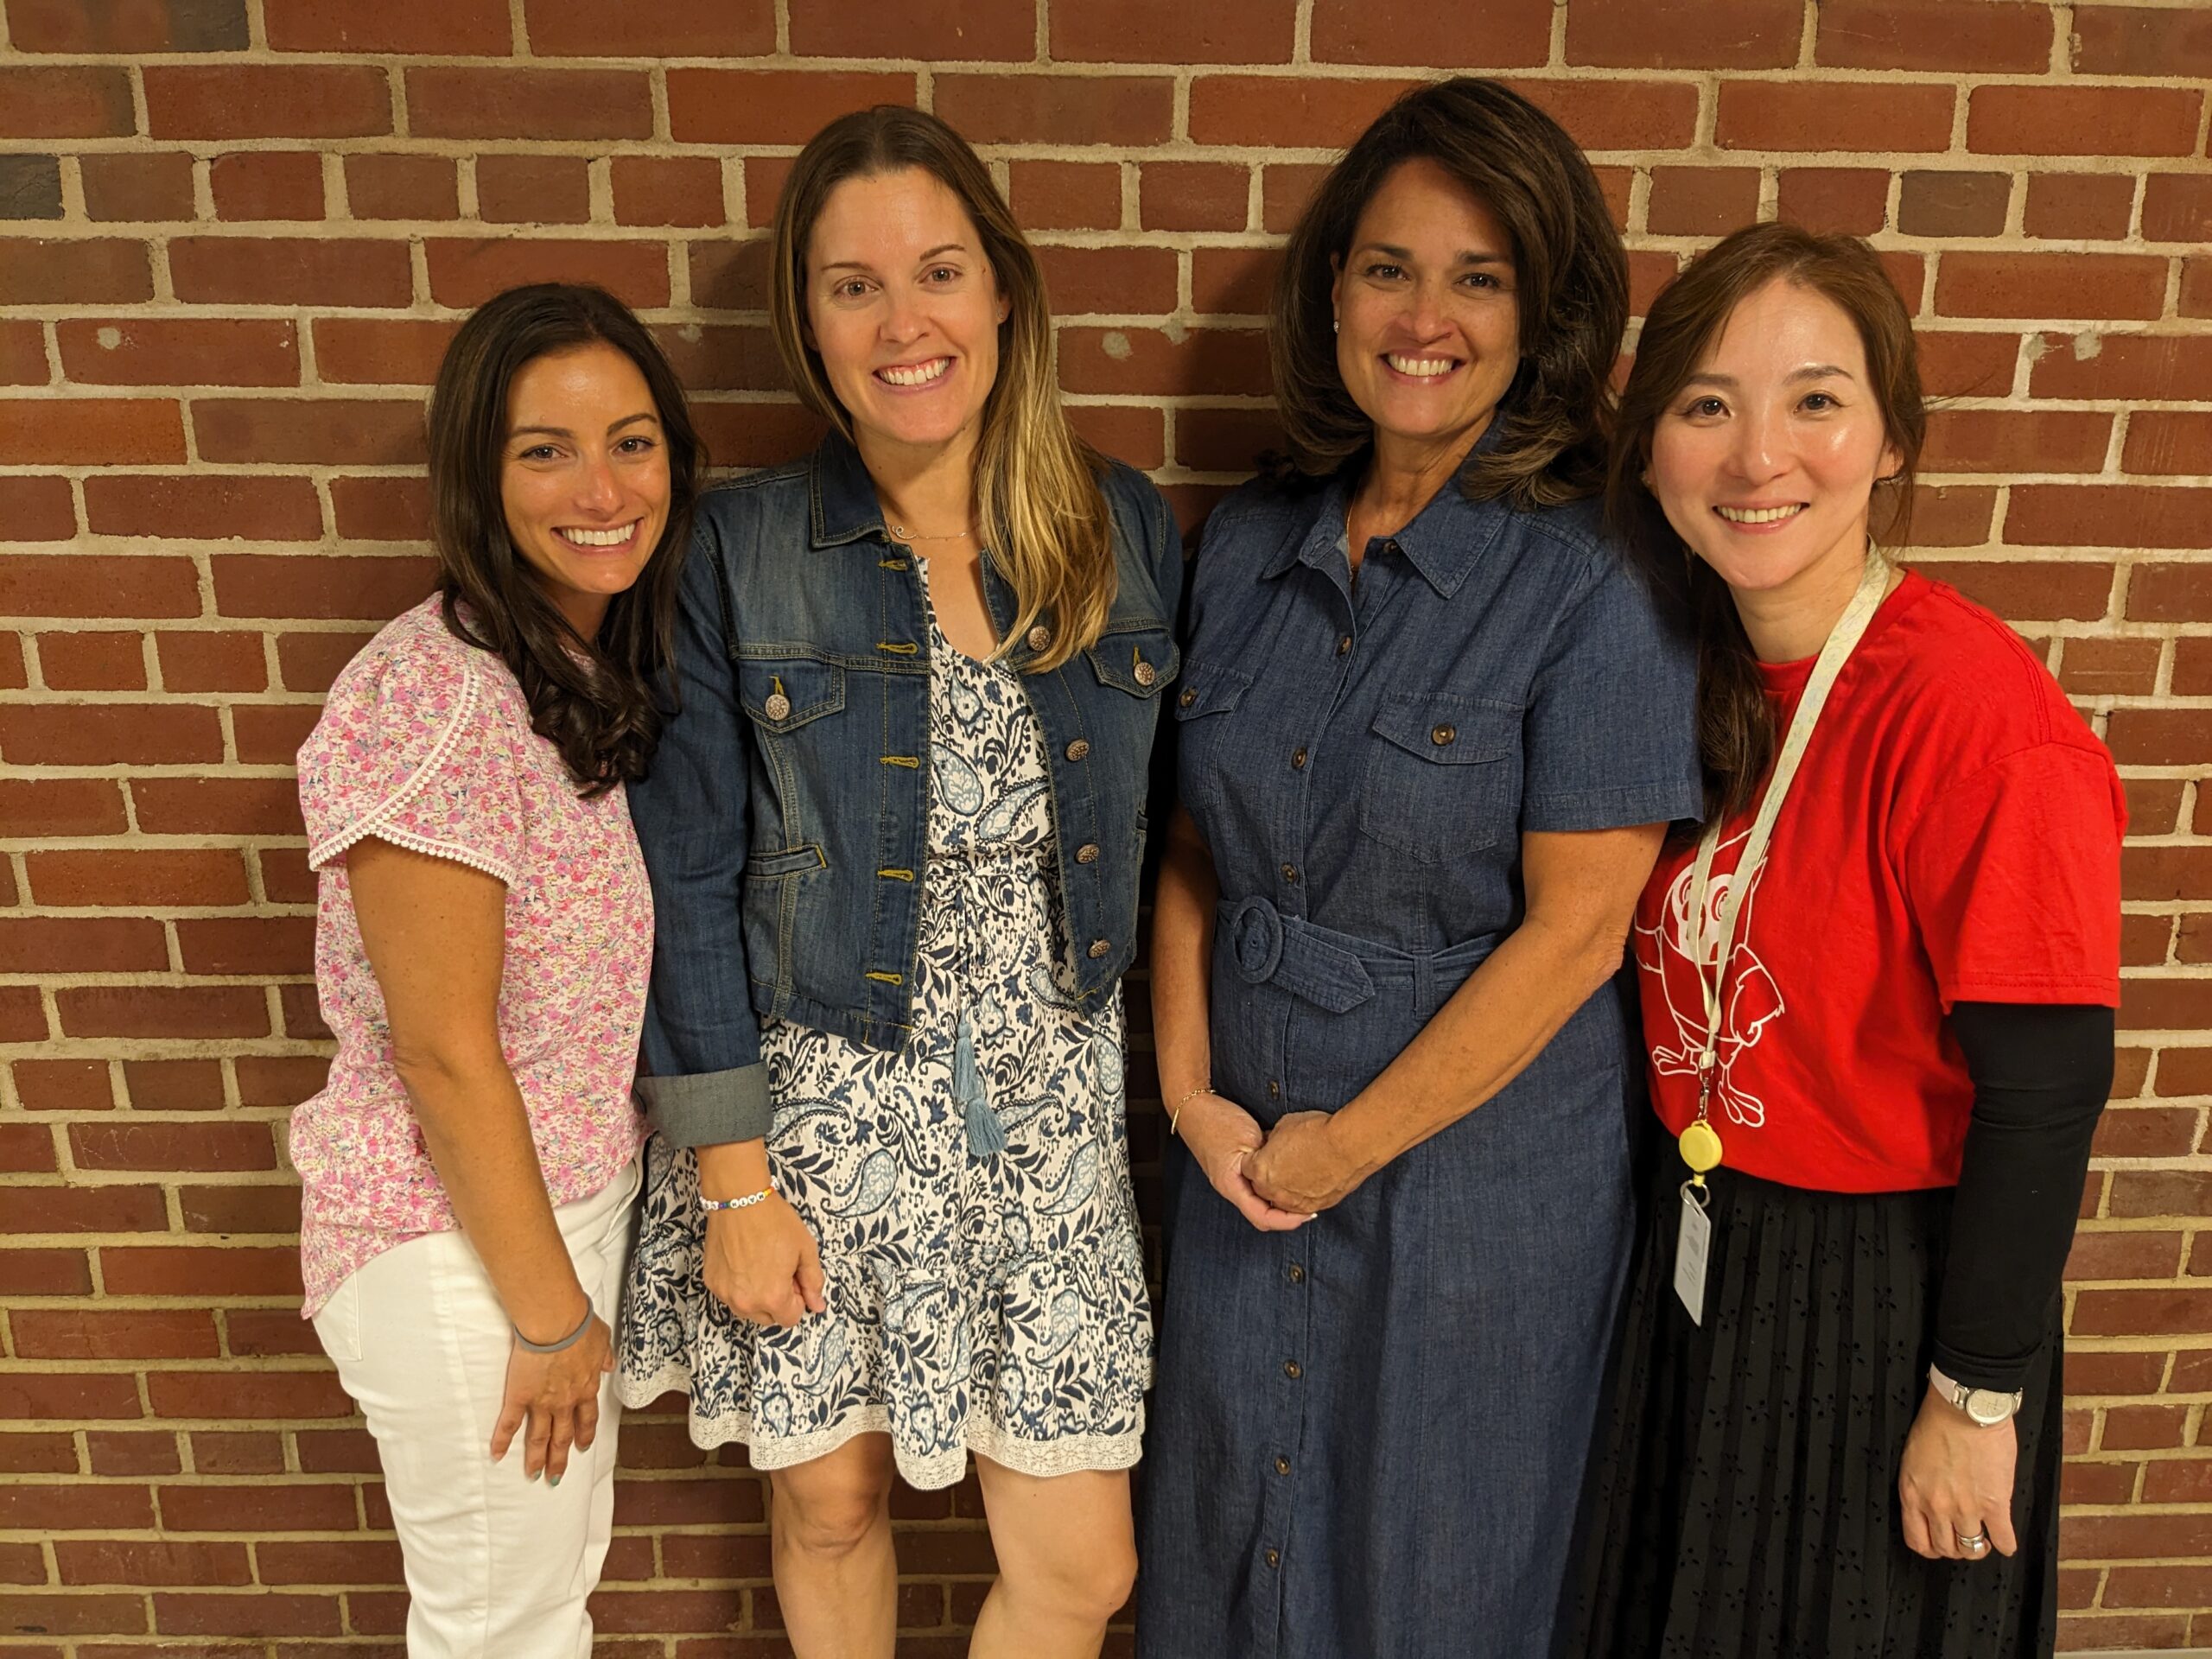 Math Specialist Team Pictured from left to right: Rachel Nesbitt, Kelly Penfield, Estela Tice, and Kanako Lyons